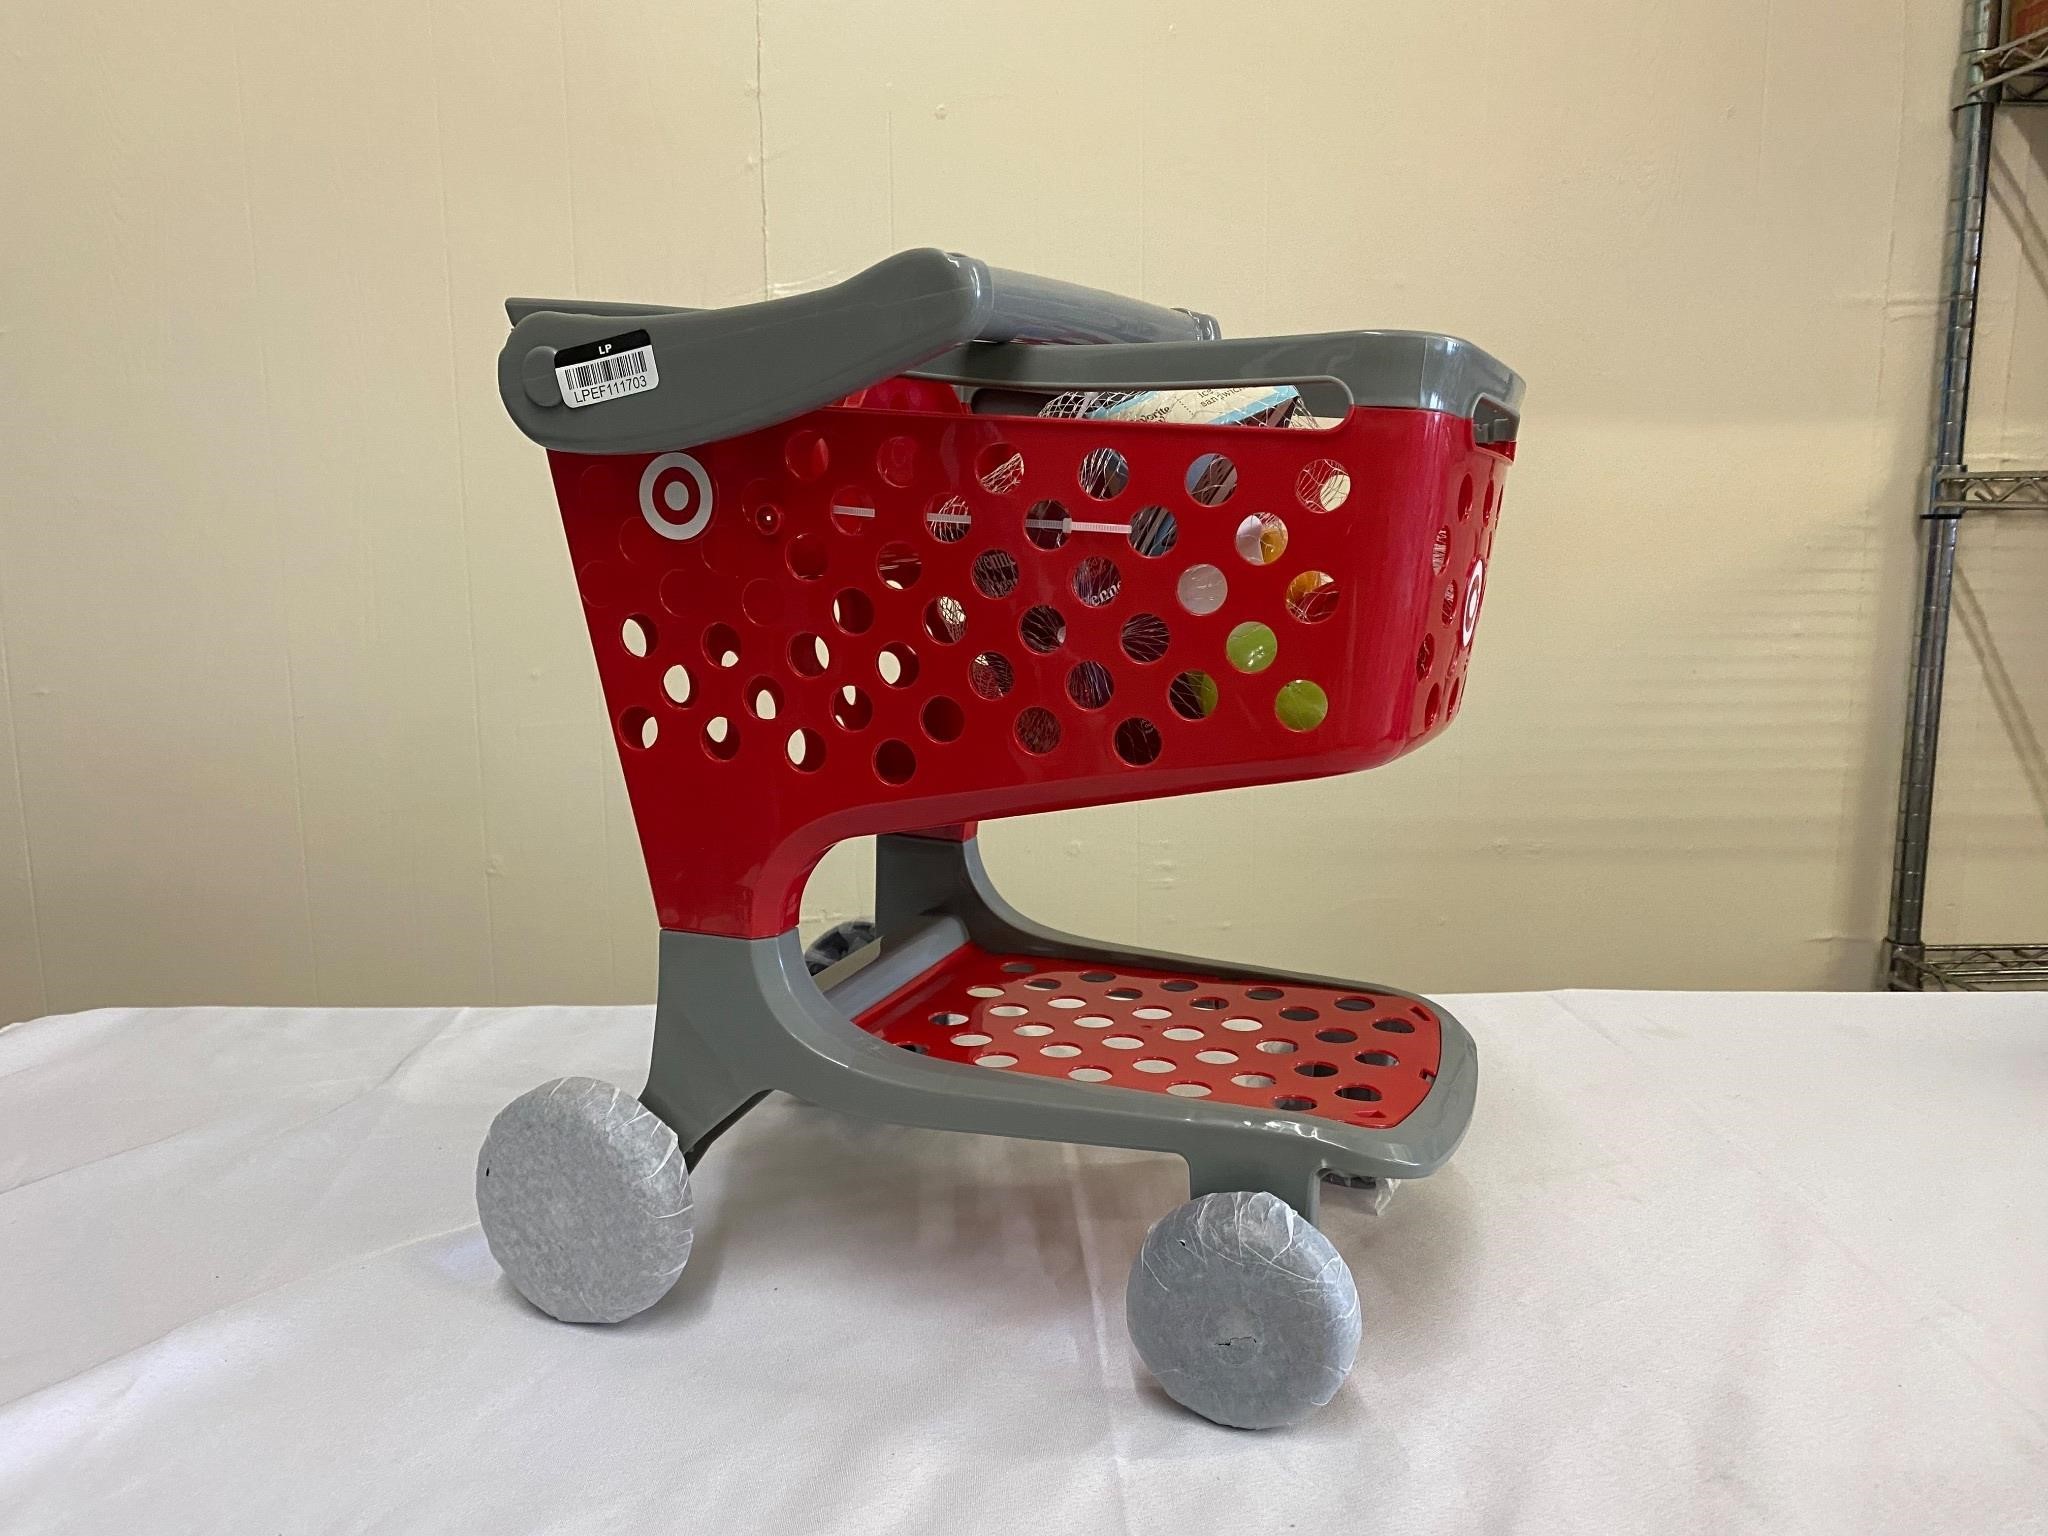 BRAND NEW Target Play Shopping Cart & Food